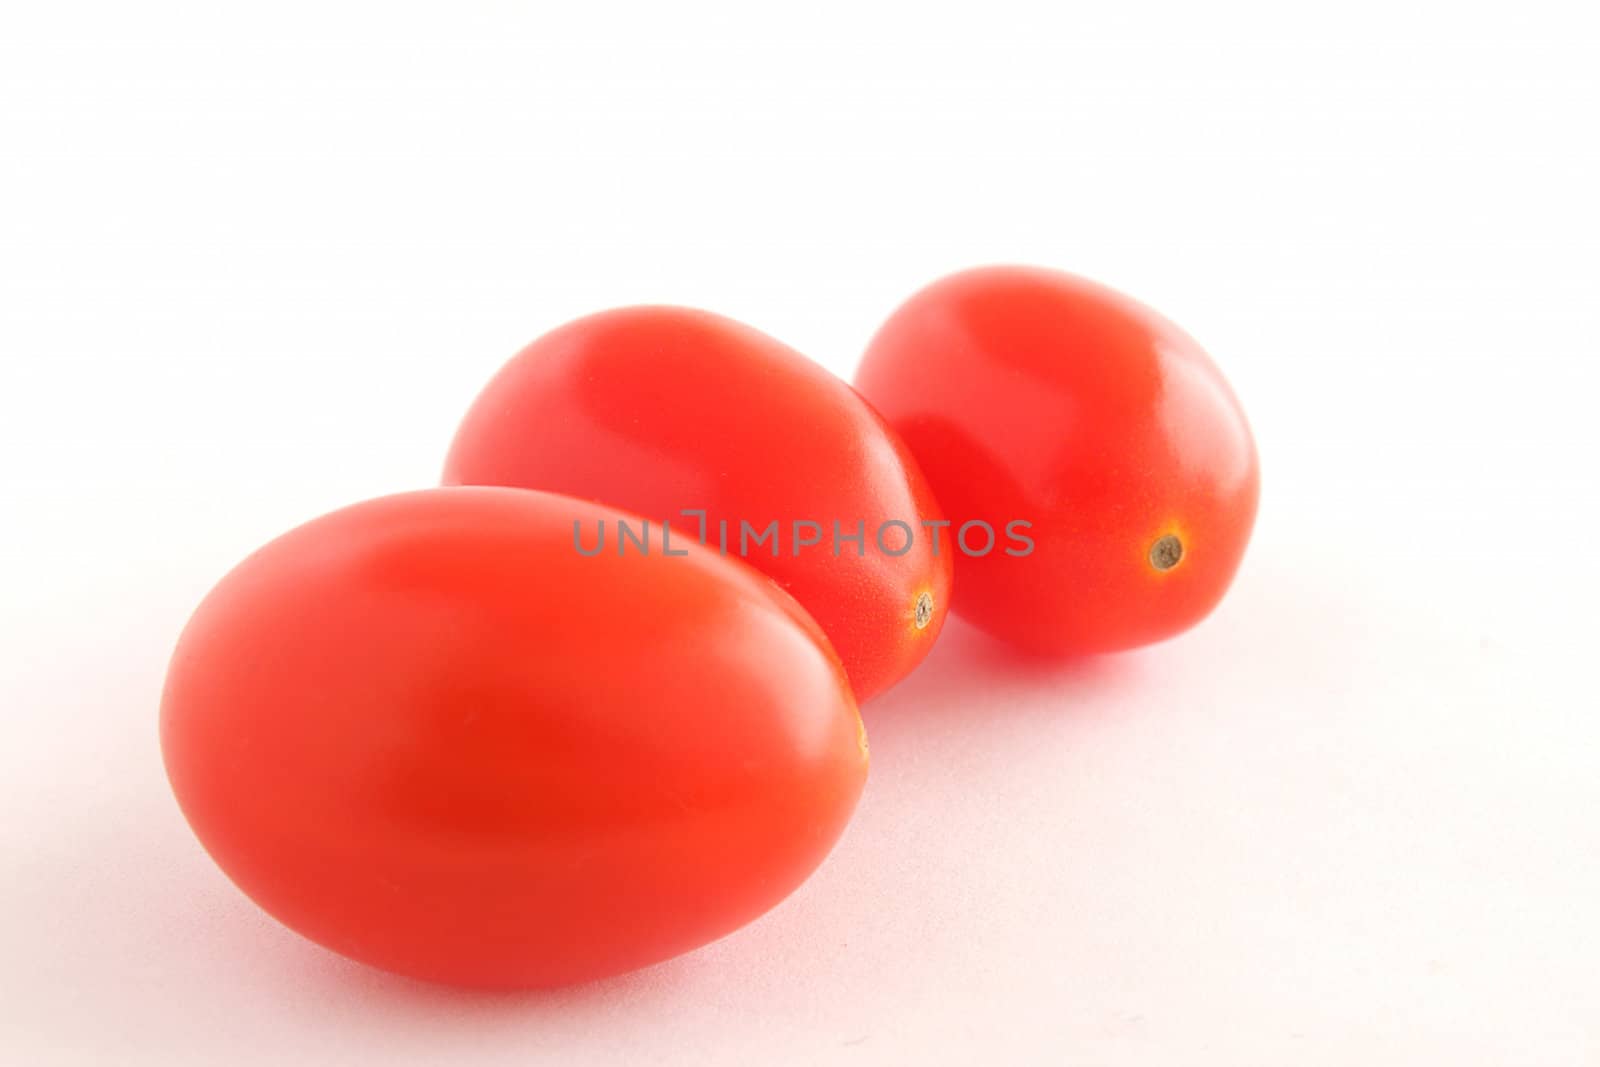 Three baby tomatoes by pulen